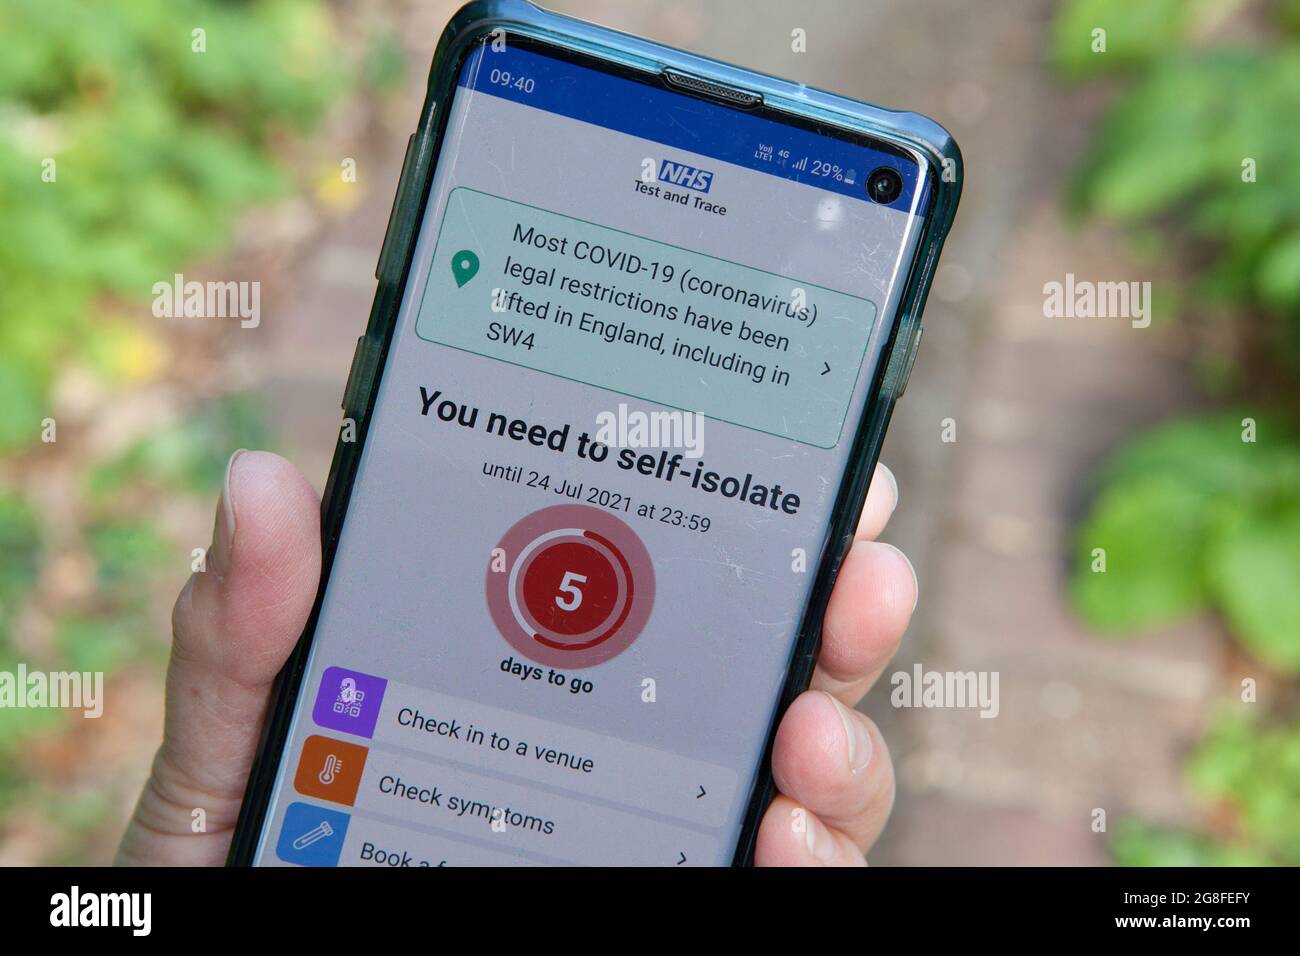 London, UK, 20 July 2021: The NHS Covid app on a smart phone shows a count-down to the end of self-isolation triggered by contact with a person infected with coronavirus. Business Minister Paul Scully had said that self-isolation was optional if pinged by the app if businesses were facing staff shortages, but Downing Street has said that employers should not encourage workers to ignore the app's warnings. Contact from NHS Track and Trace is a legal requirement but notifications from the app are not compulsory. Anna Watson/Alamy Live News Stock Photo